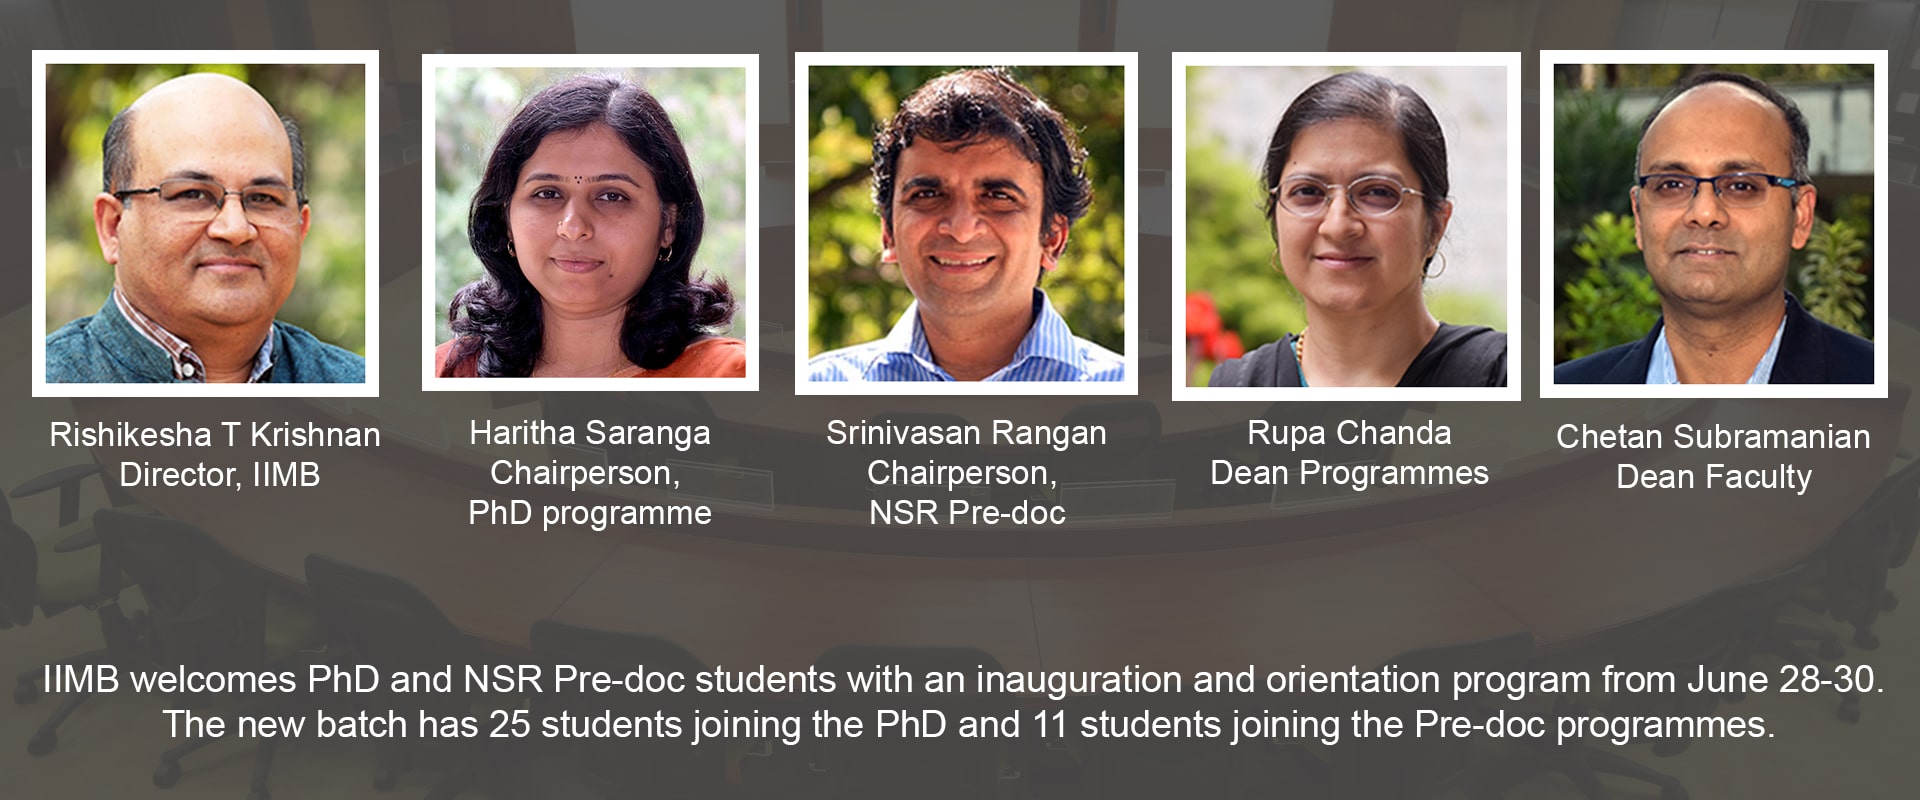 IIMB welcomes PhD and NSR Pre-doc students with an inauguration and orientation program from June 28-30